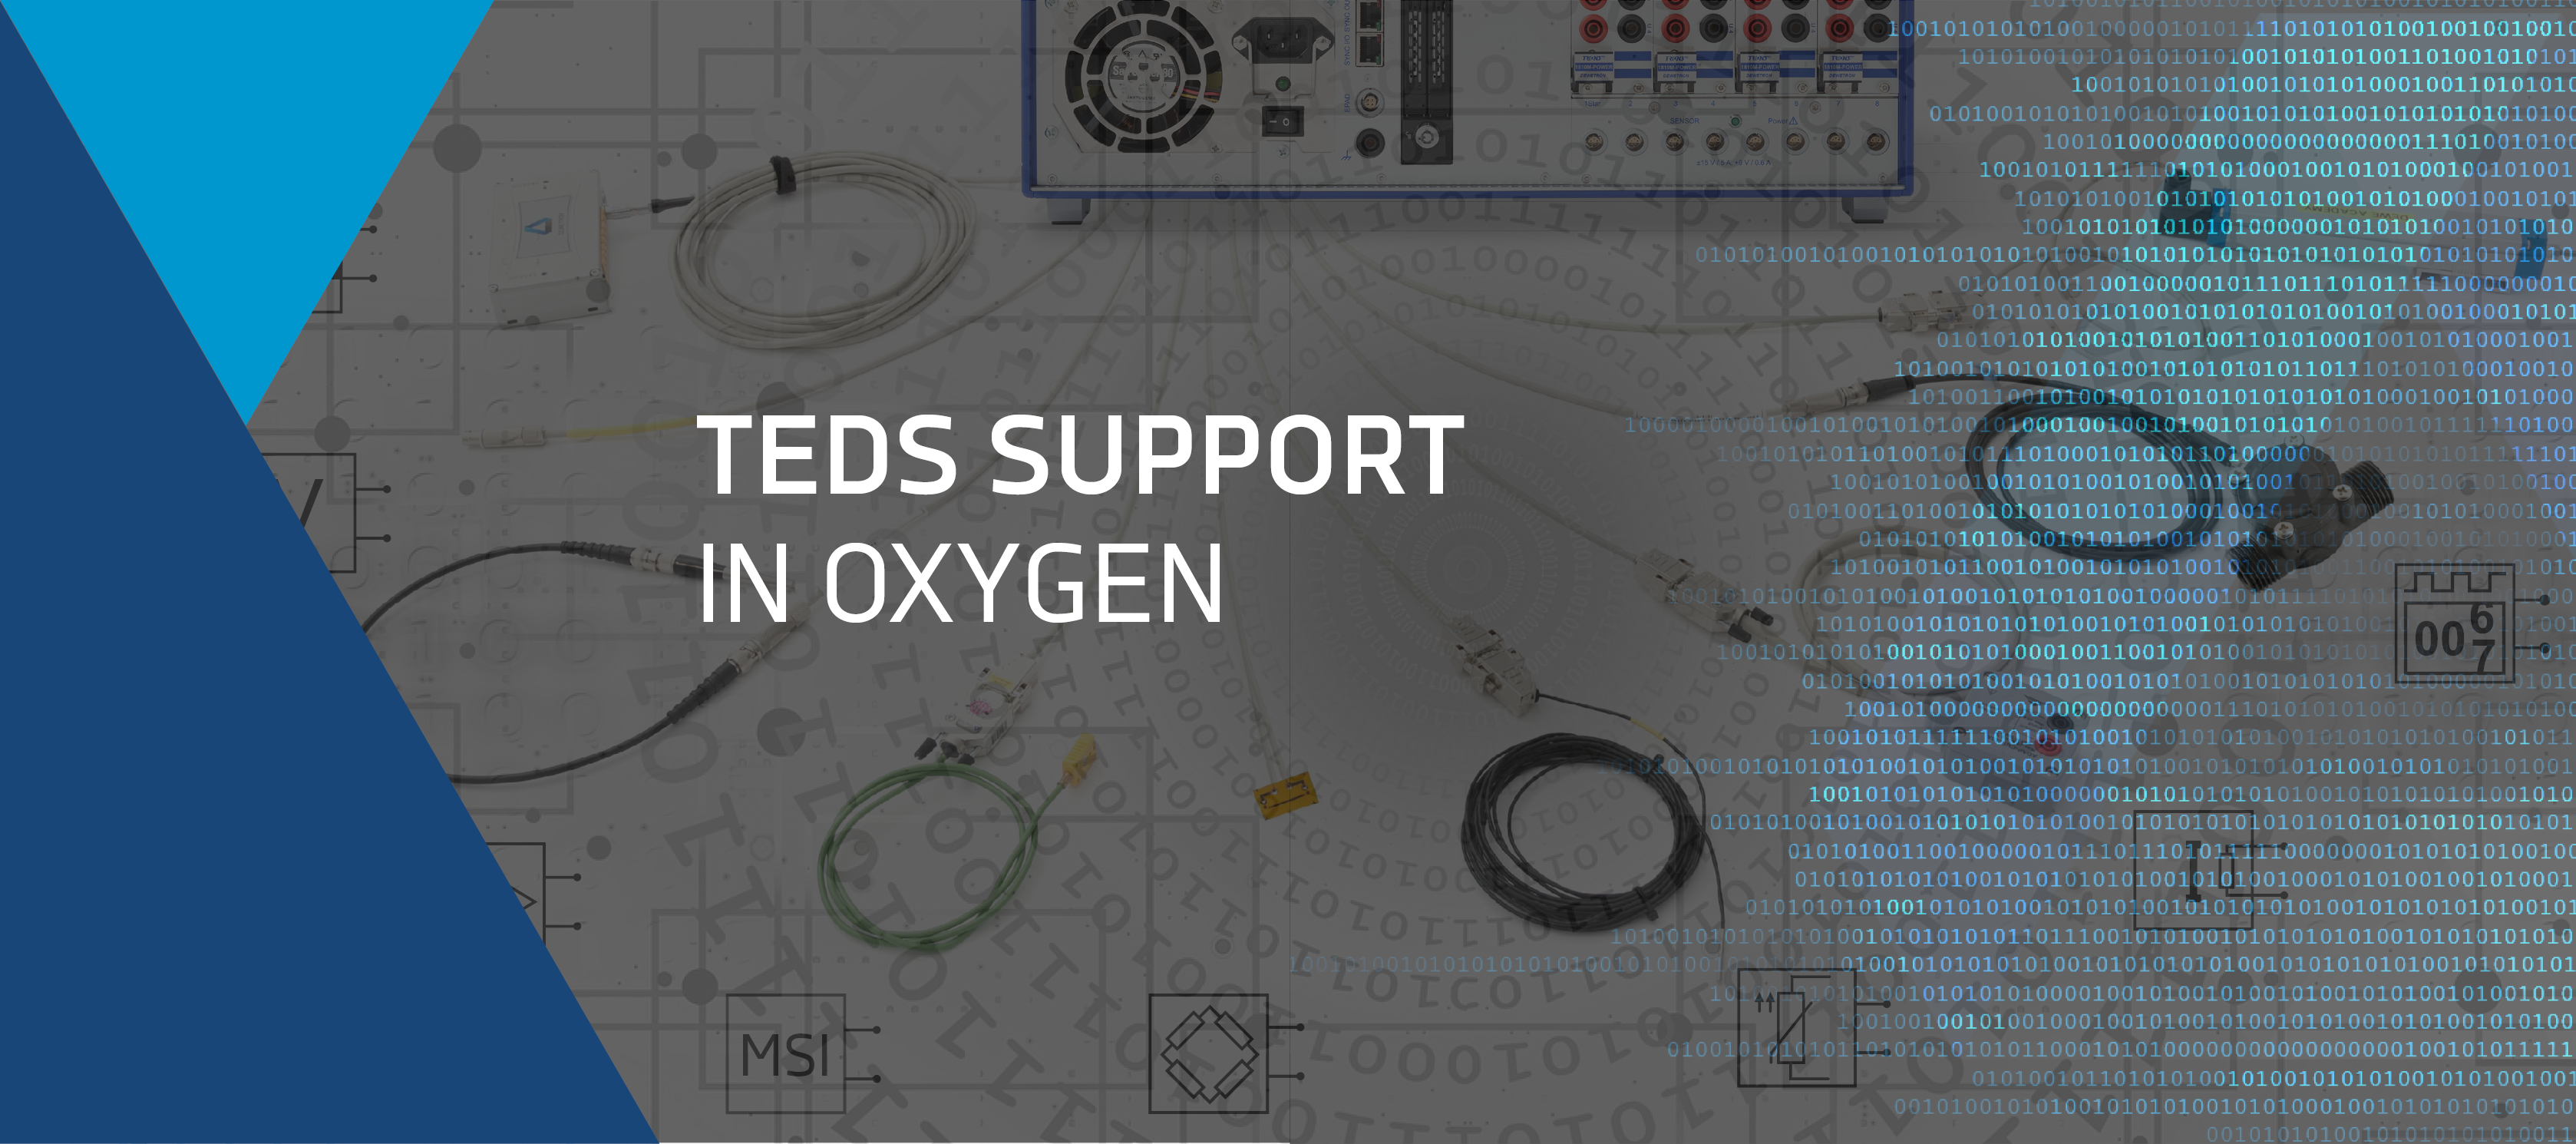 teds-support-in-oxygen